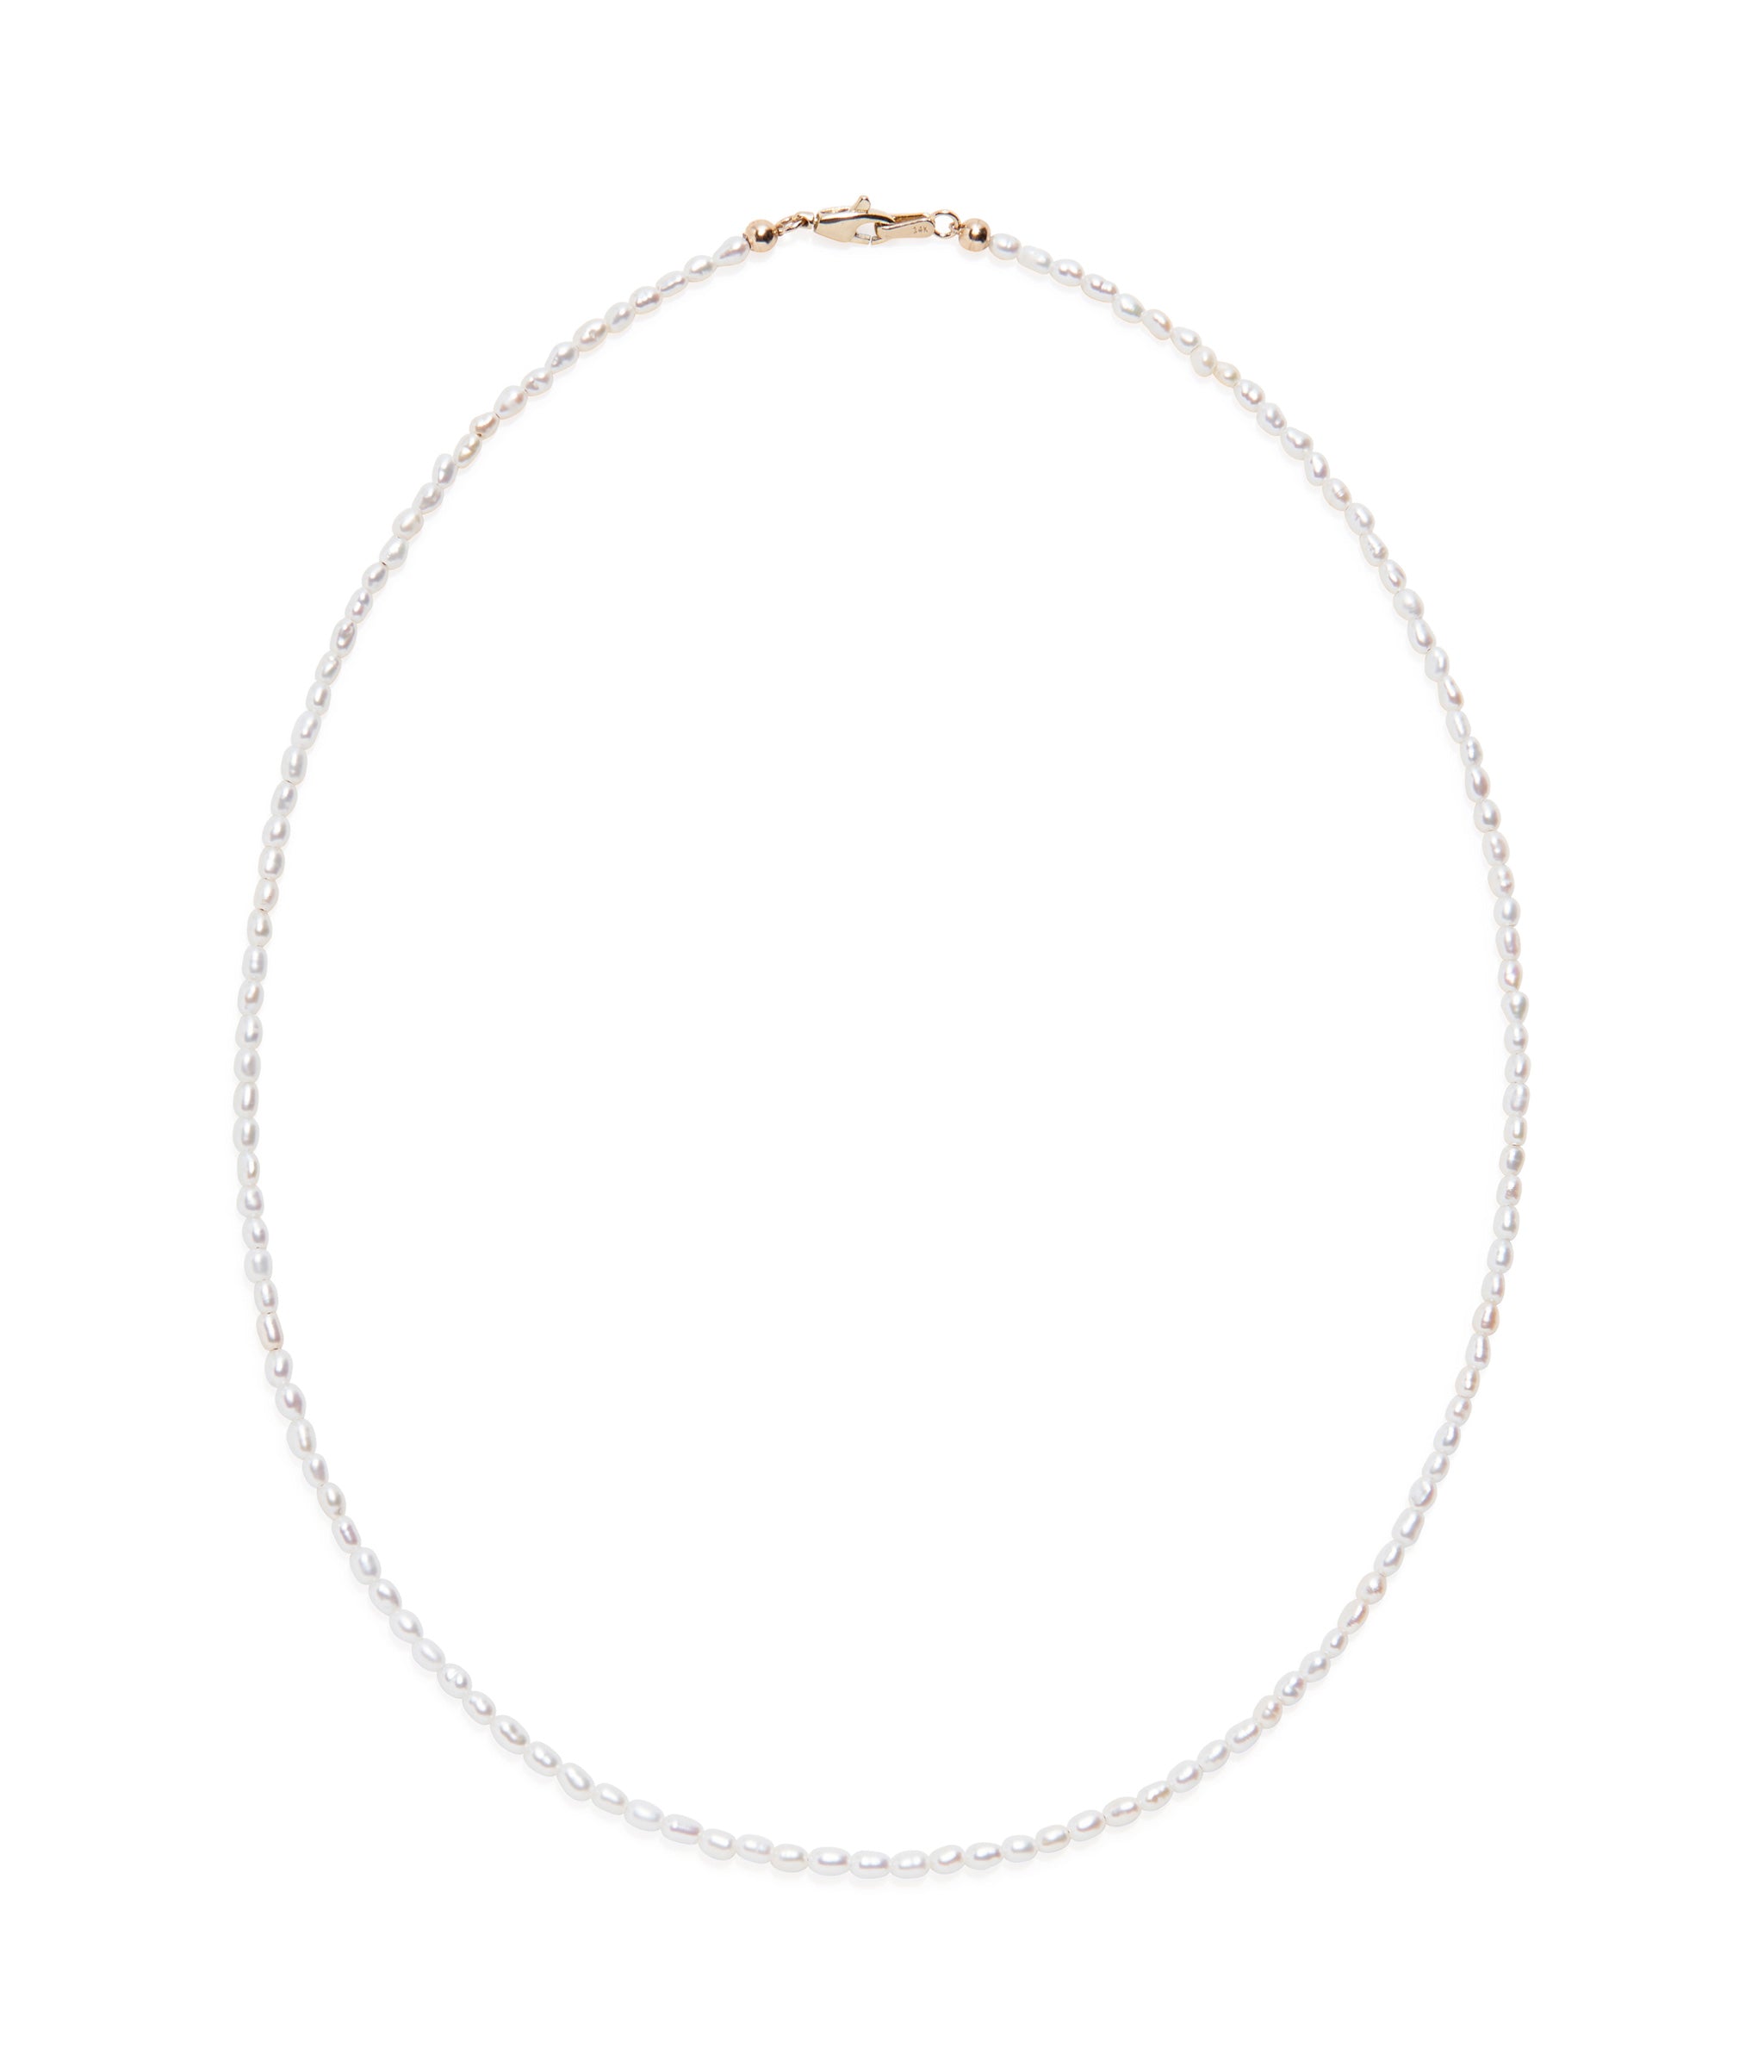 Tiny Beaded 14k Gold and Pearl Necklace. Rice pearl beads with elongated gold lobster clasp.